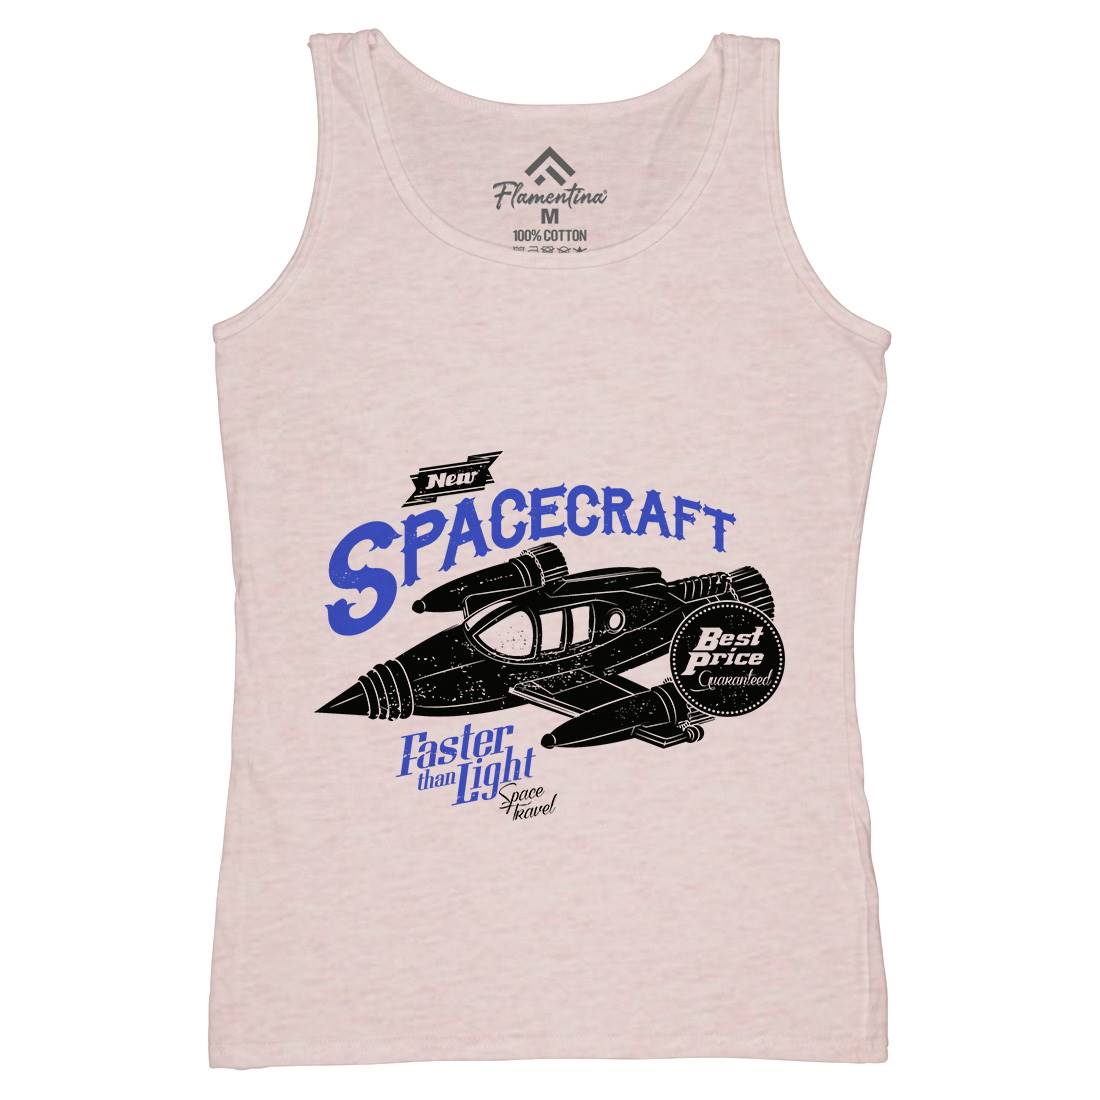 Spacecraft Womens Organic Tank Top Vest Space A958